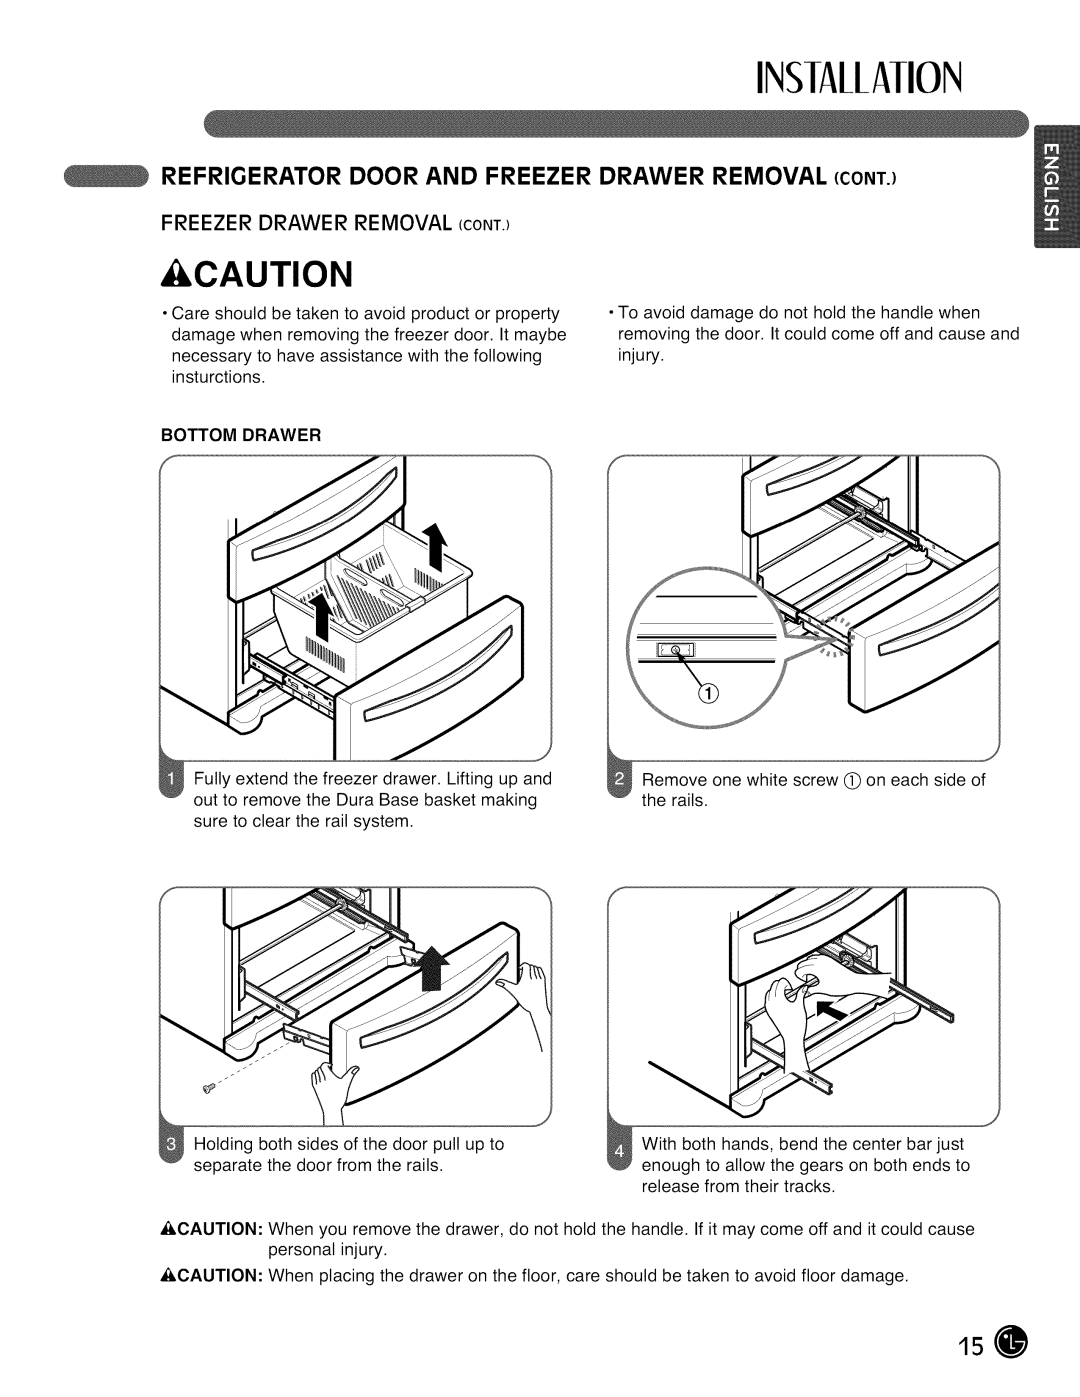 LG Electronics LMX28988 manual FREEZER DRAWER REMOVAL cont, Bottom Drawer, INSIAllAIION, Caution 